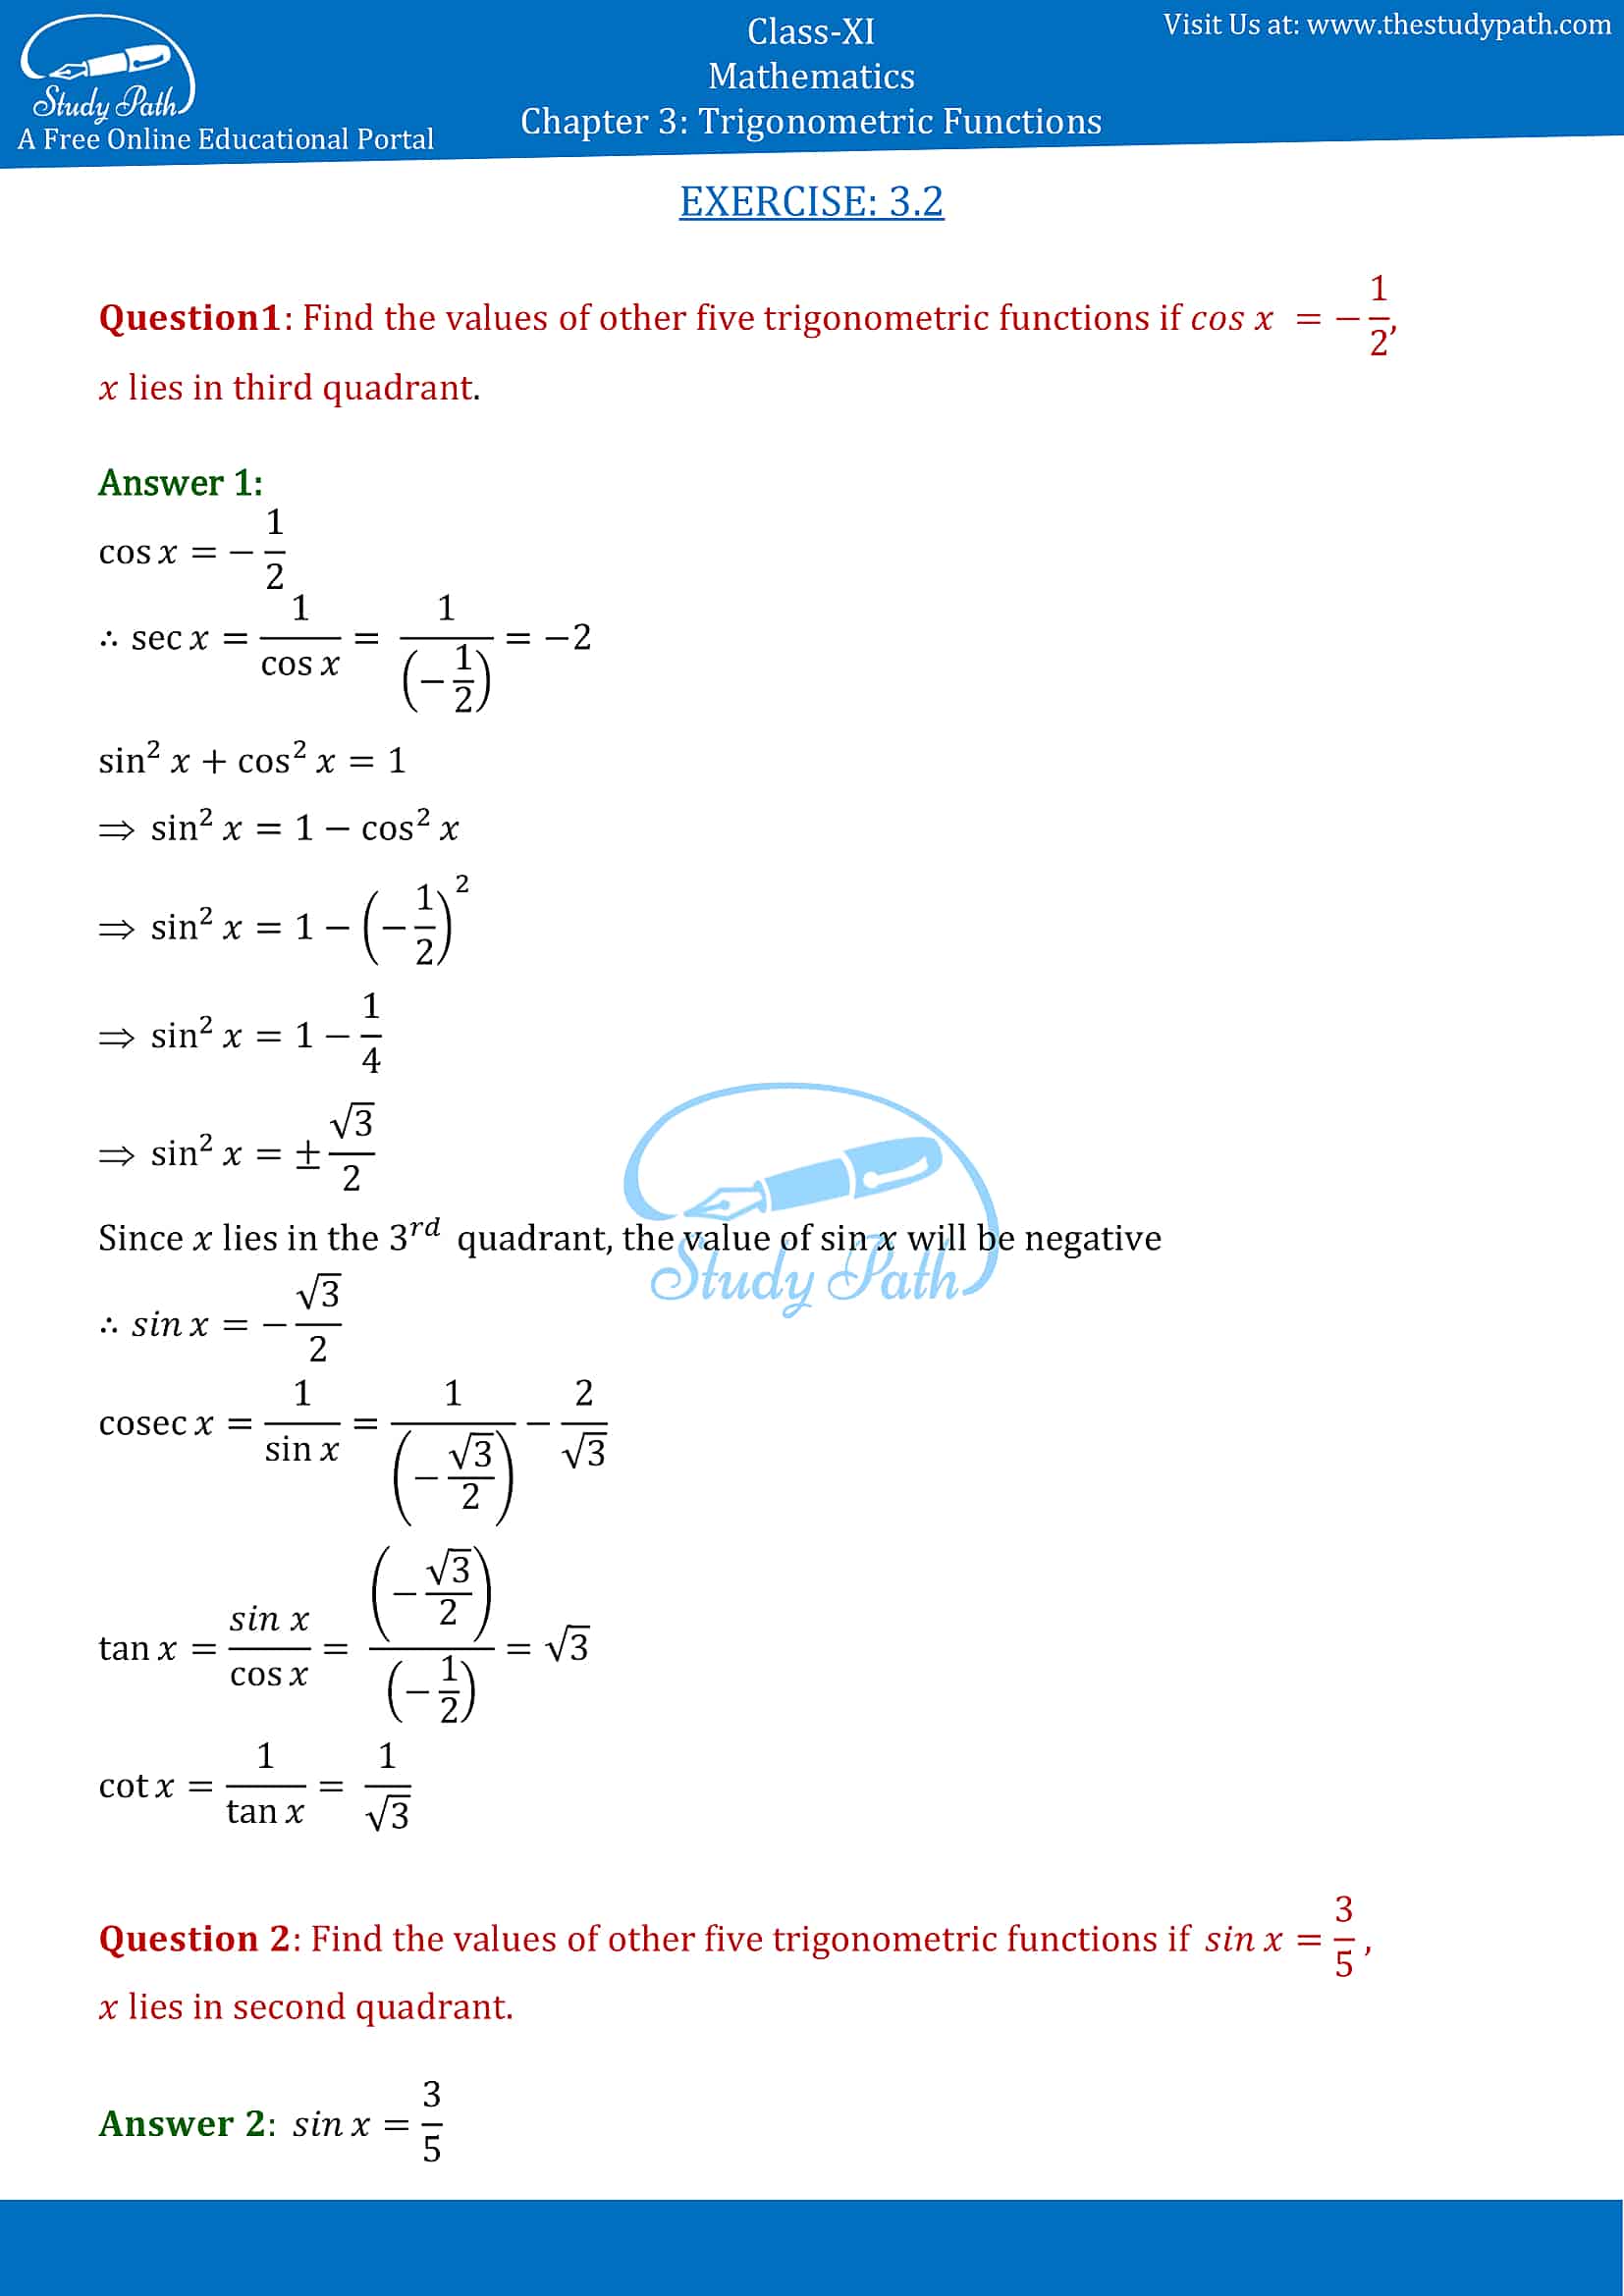 NCERT Solutions for Class 11 Maths Chapter 3 Trigonometric Functions Exercise 3.2